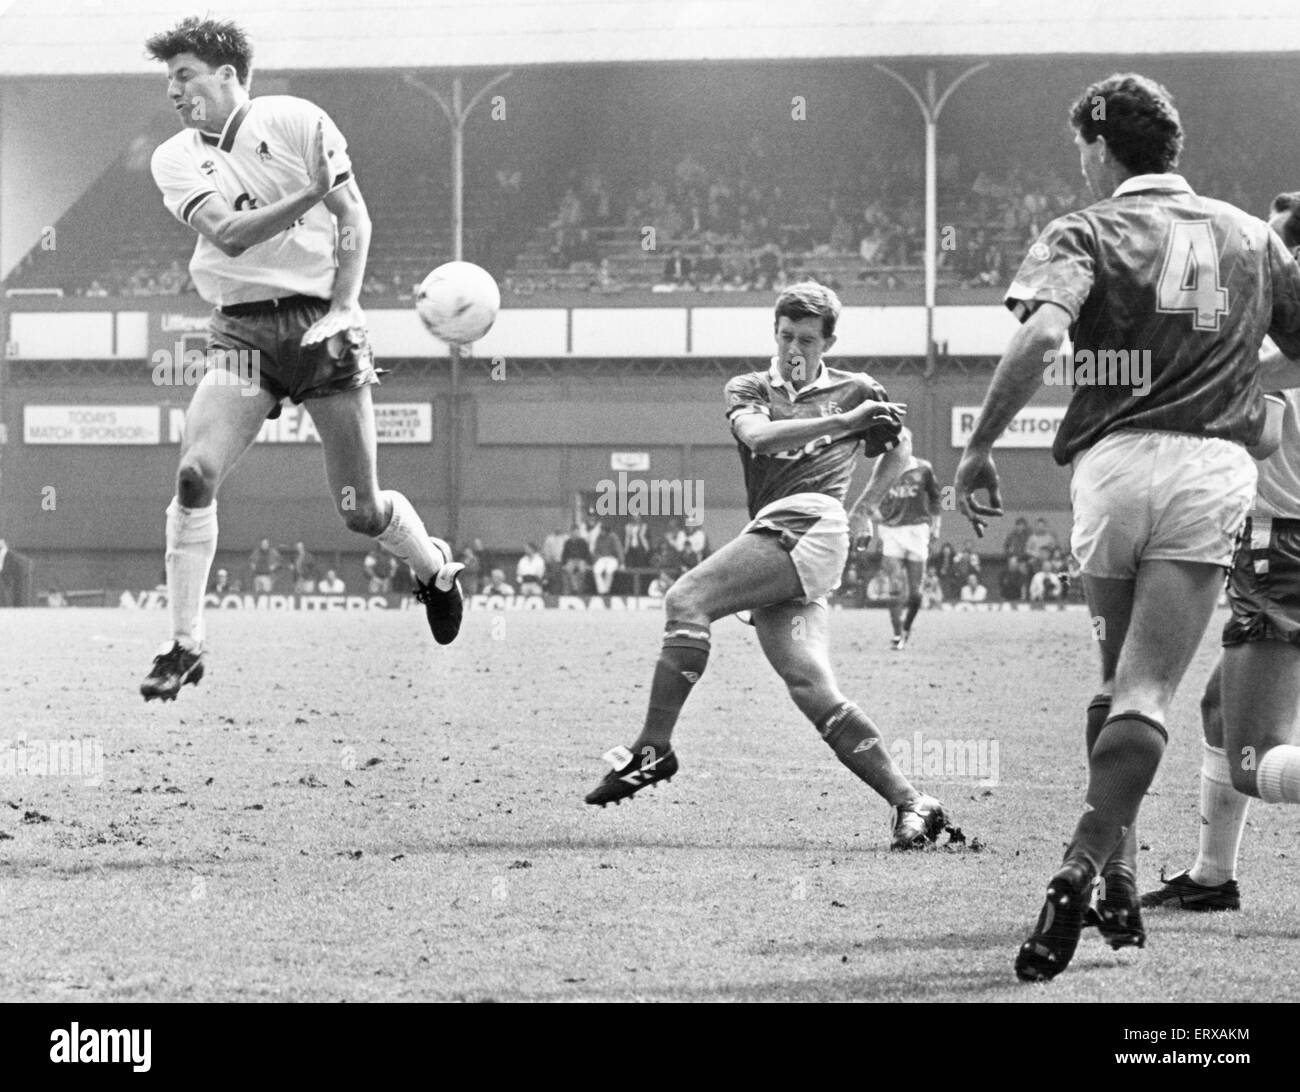 Everton footballer Kevin Sheedy chas a shot at goal blocked by Chelsea defenders during the League Division One match at Goodison Park. 13th April 1991. Stock Photo